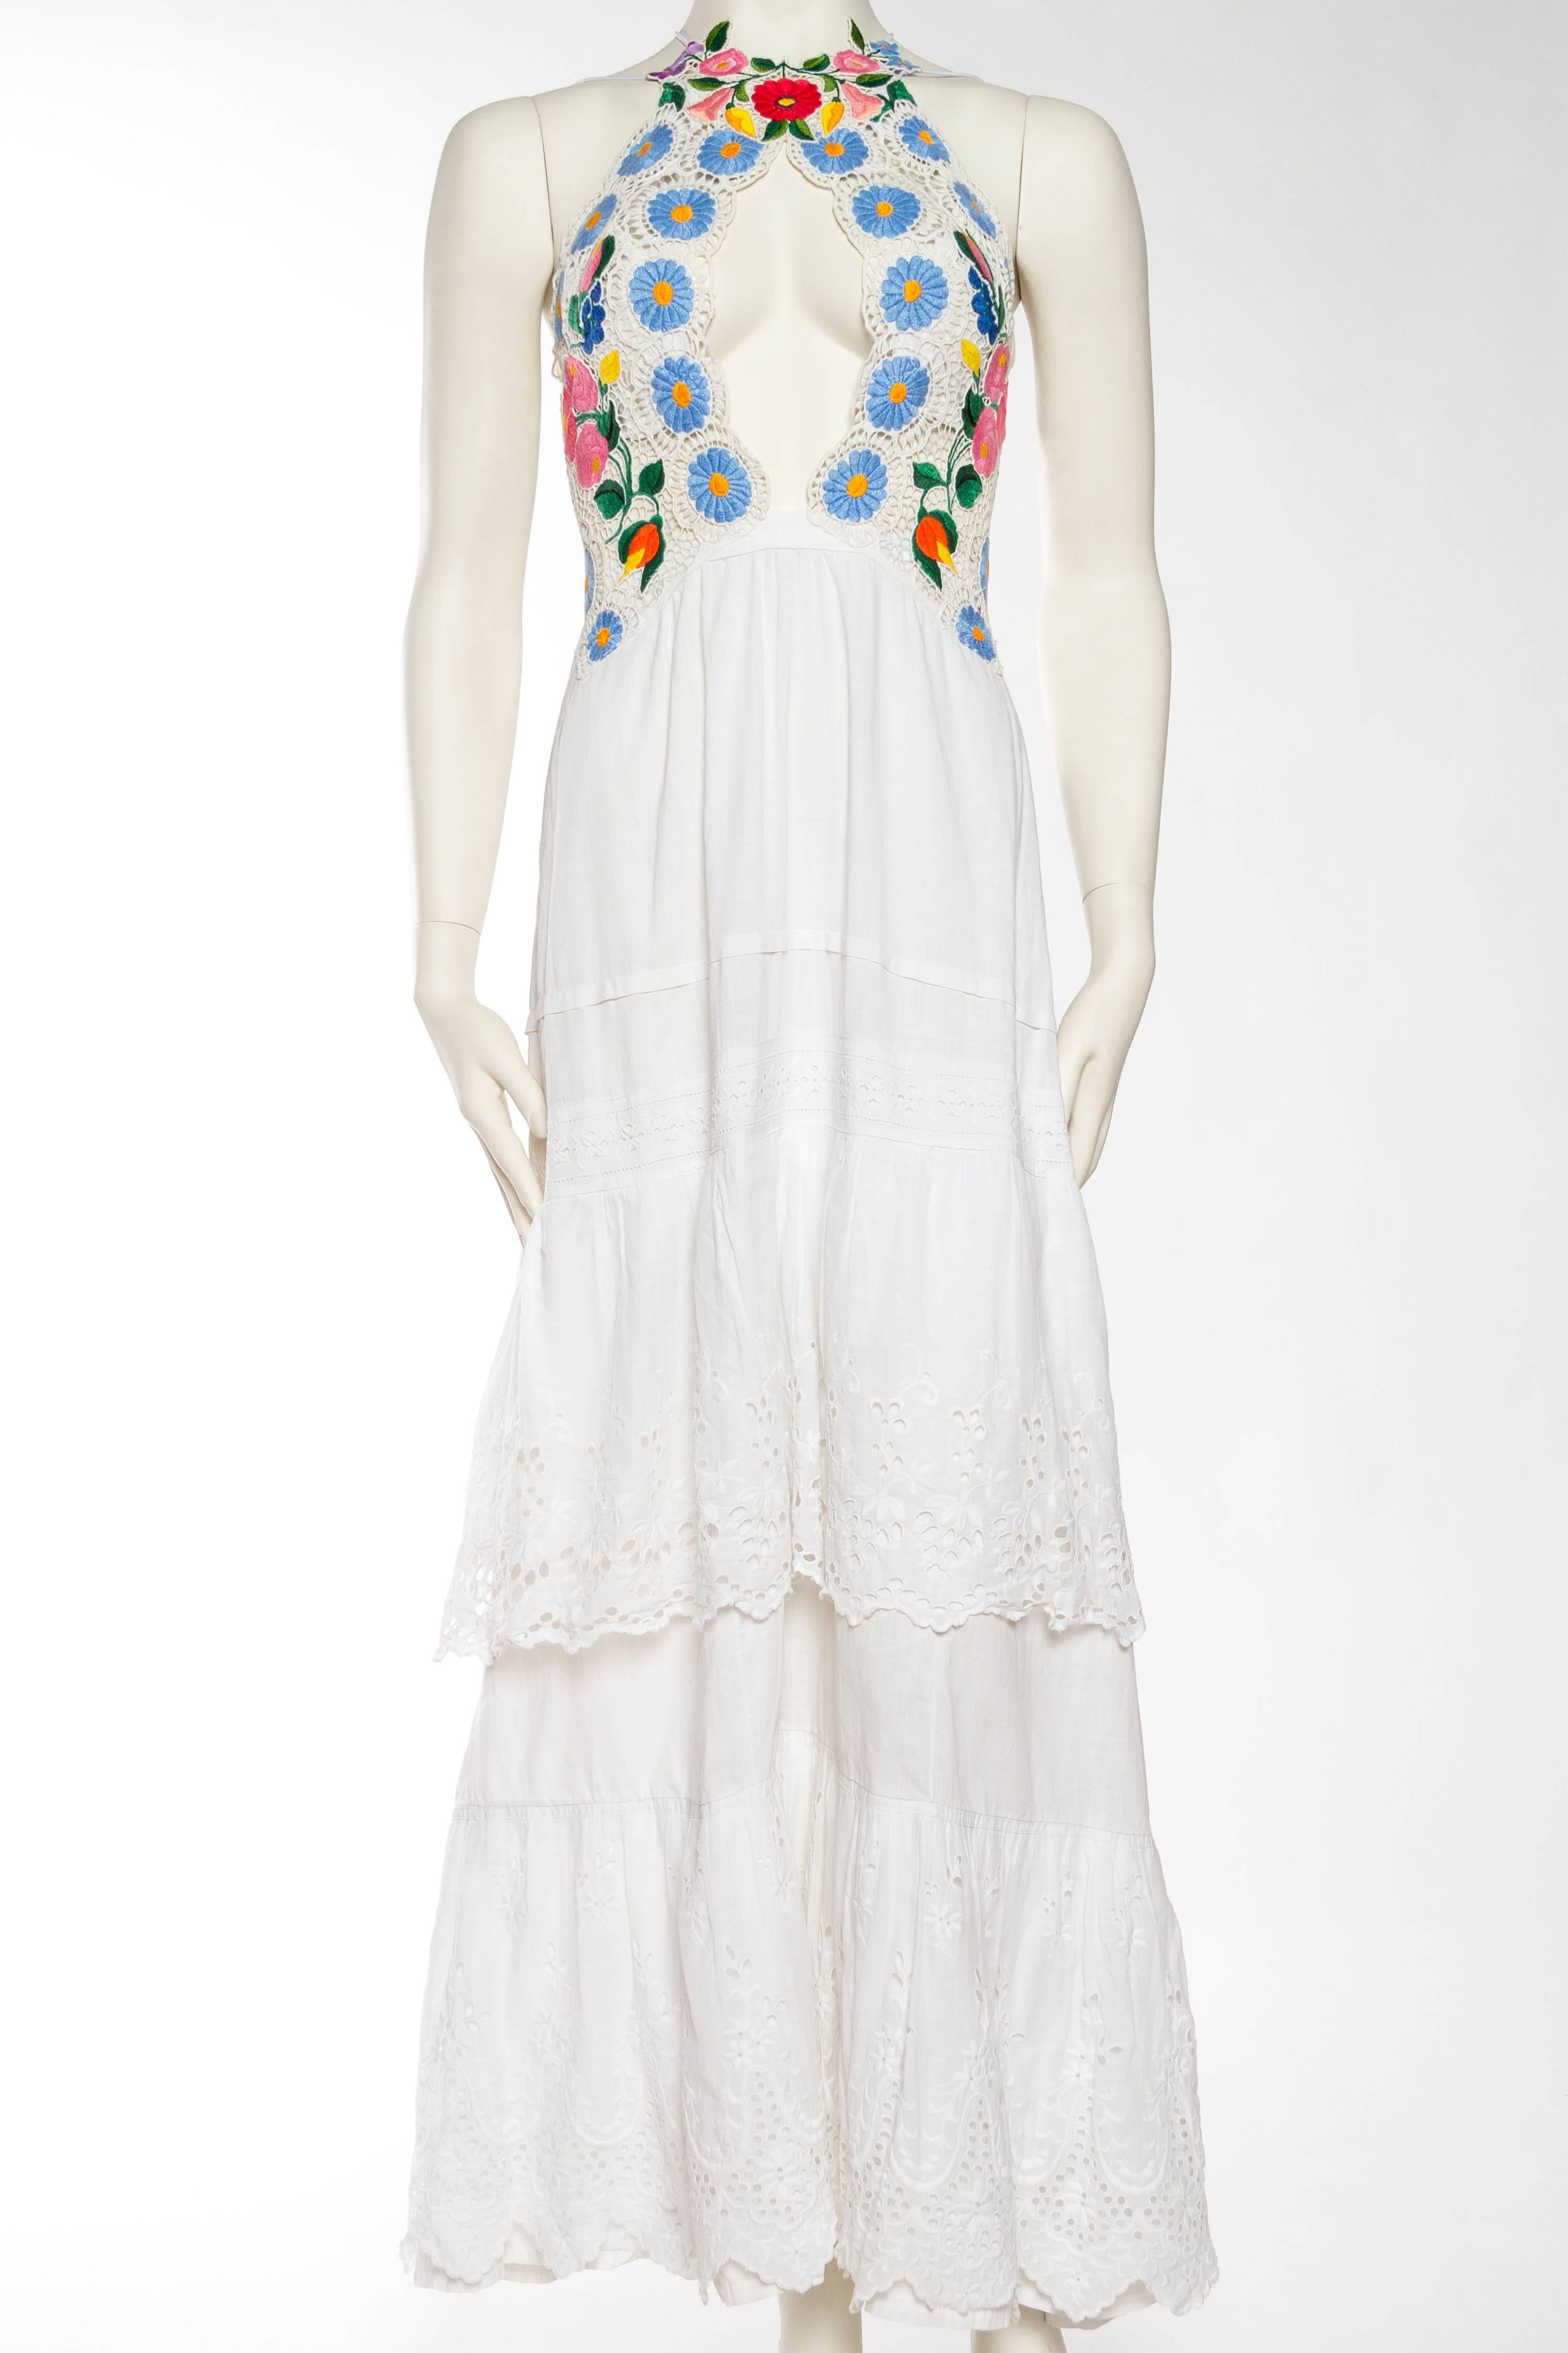 This sexy Morphew Lab stunner is built with a top made from hand embroidered, most likely Polish, lace dating to the late mid-century. All of the flowers are hand embroidered on a cotton base and cut and pieced together painstakingly by hand, a true